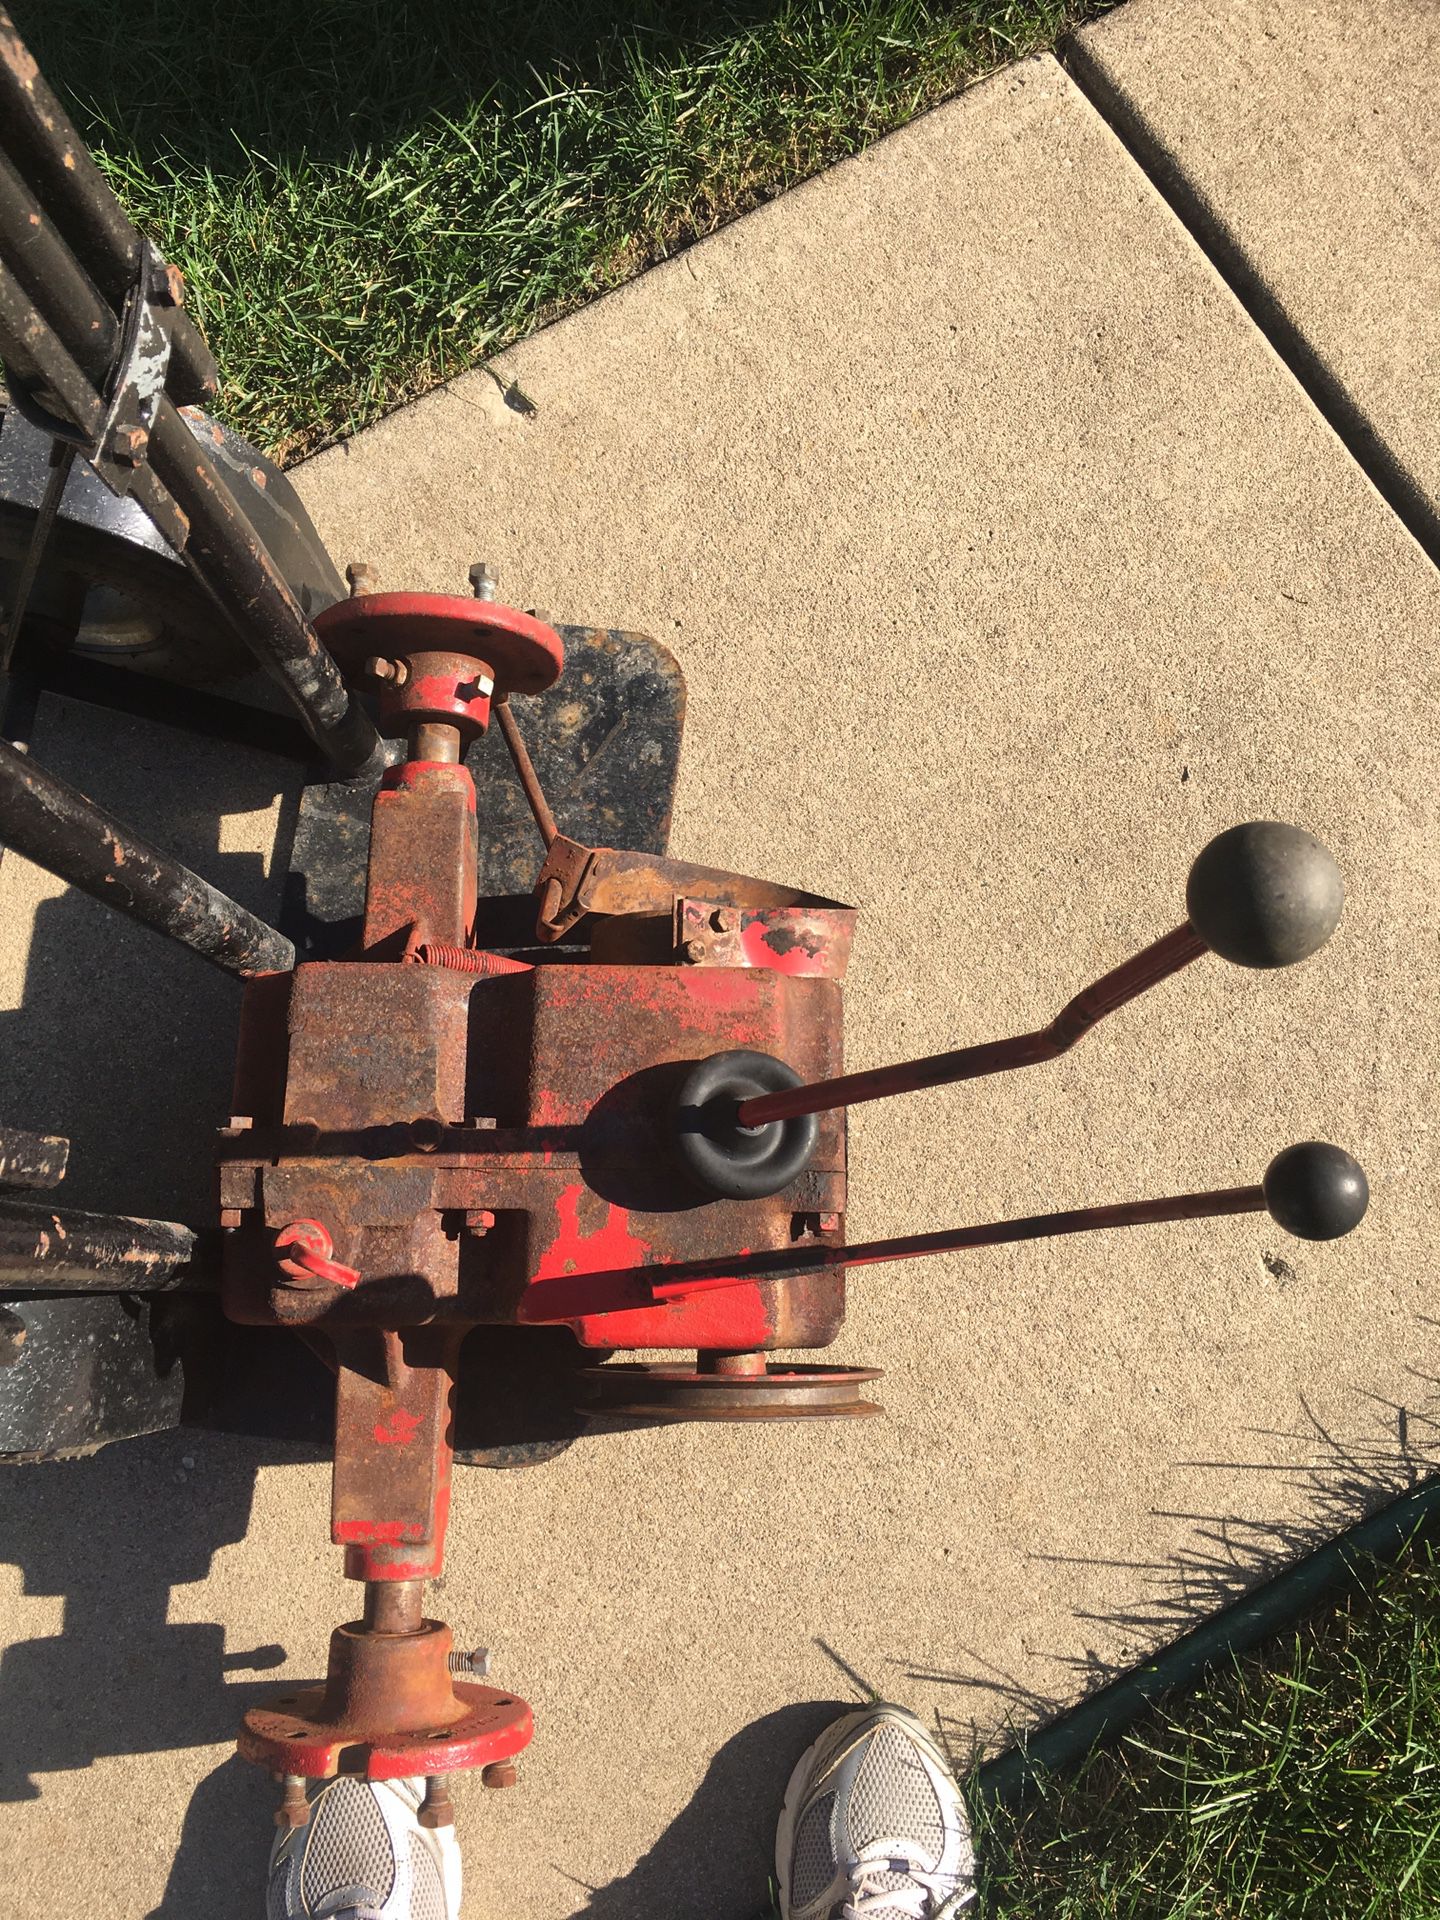 Transmission for a Wheel Horse Tractor